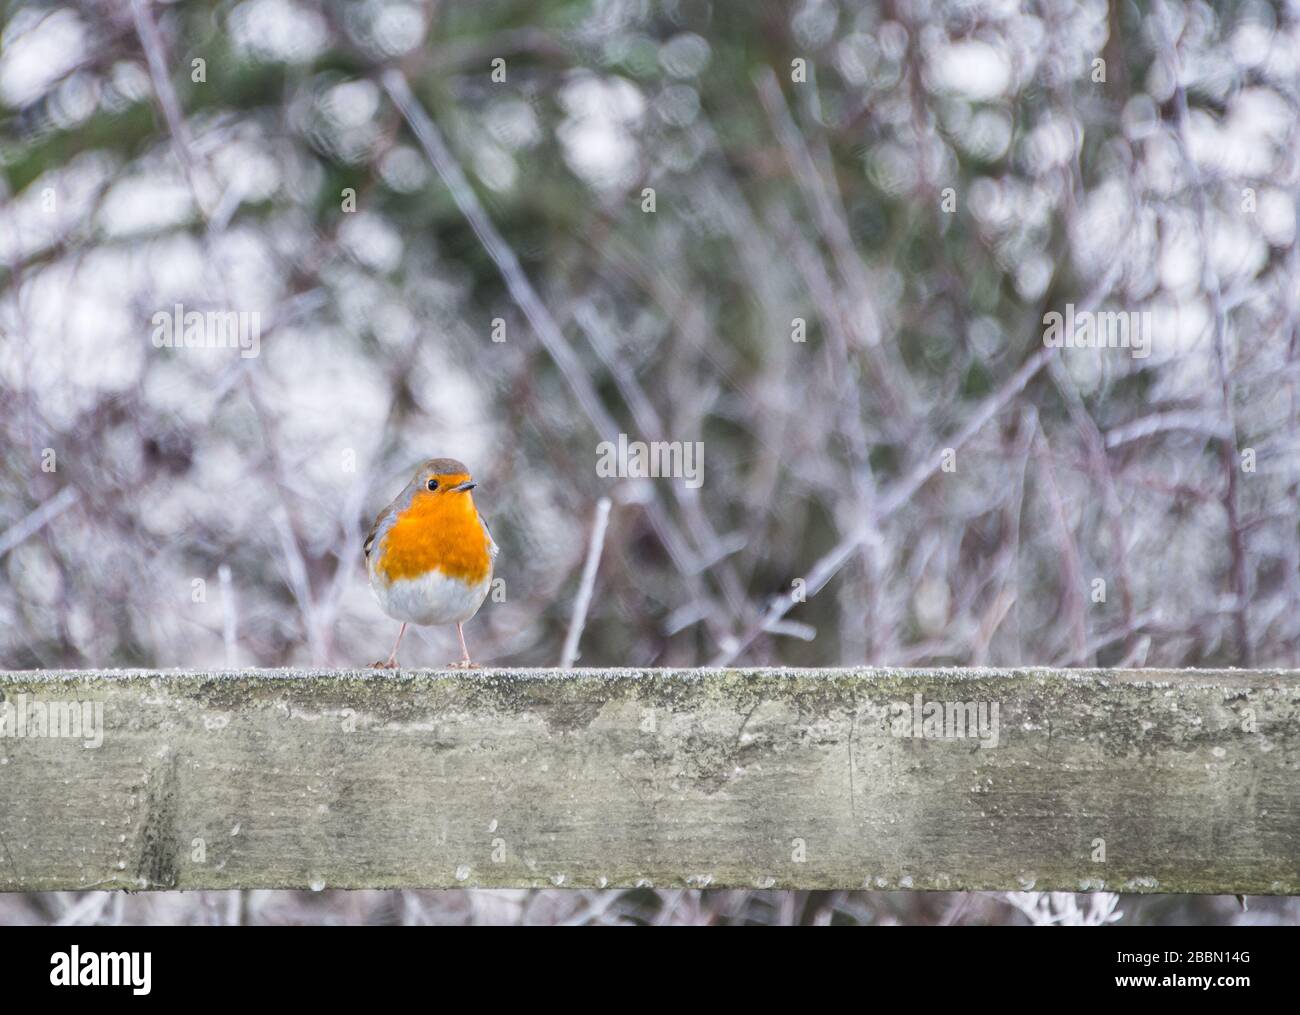 UK Wildlife - Robin on a frosty fence in the winter - Towcester, Northants, UK Stock Photo